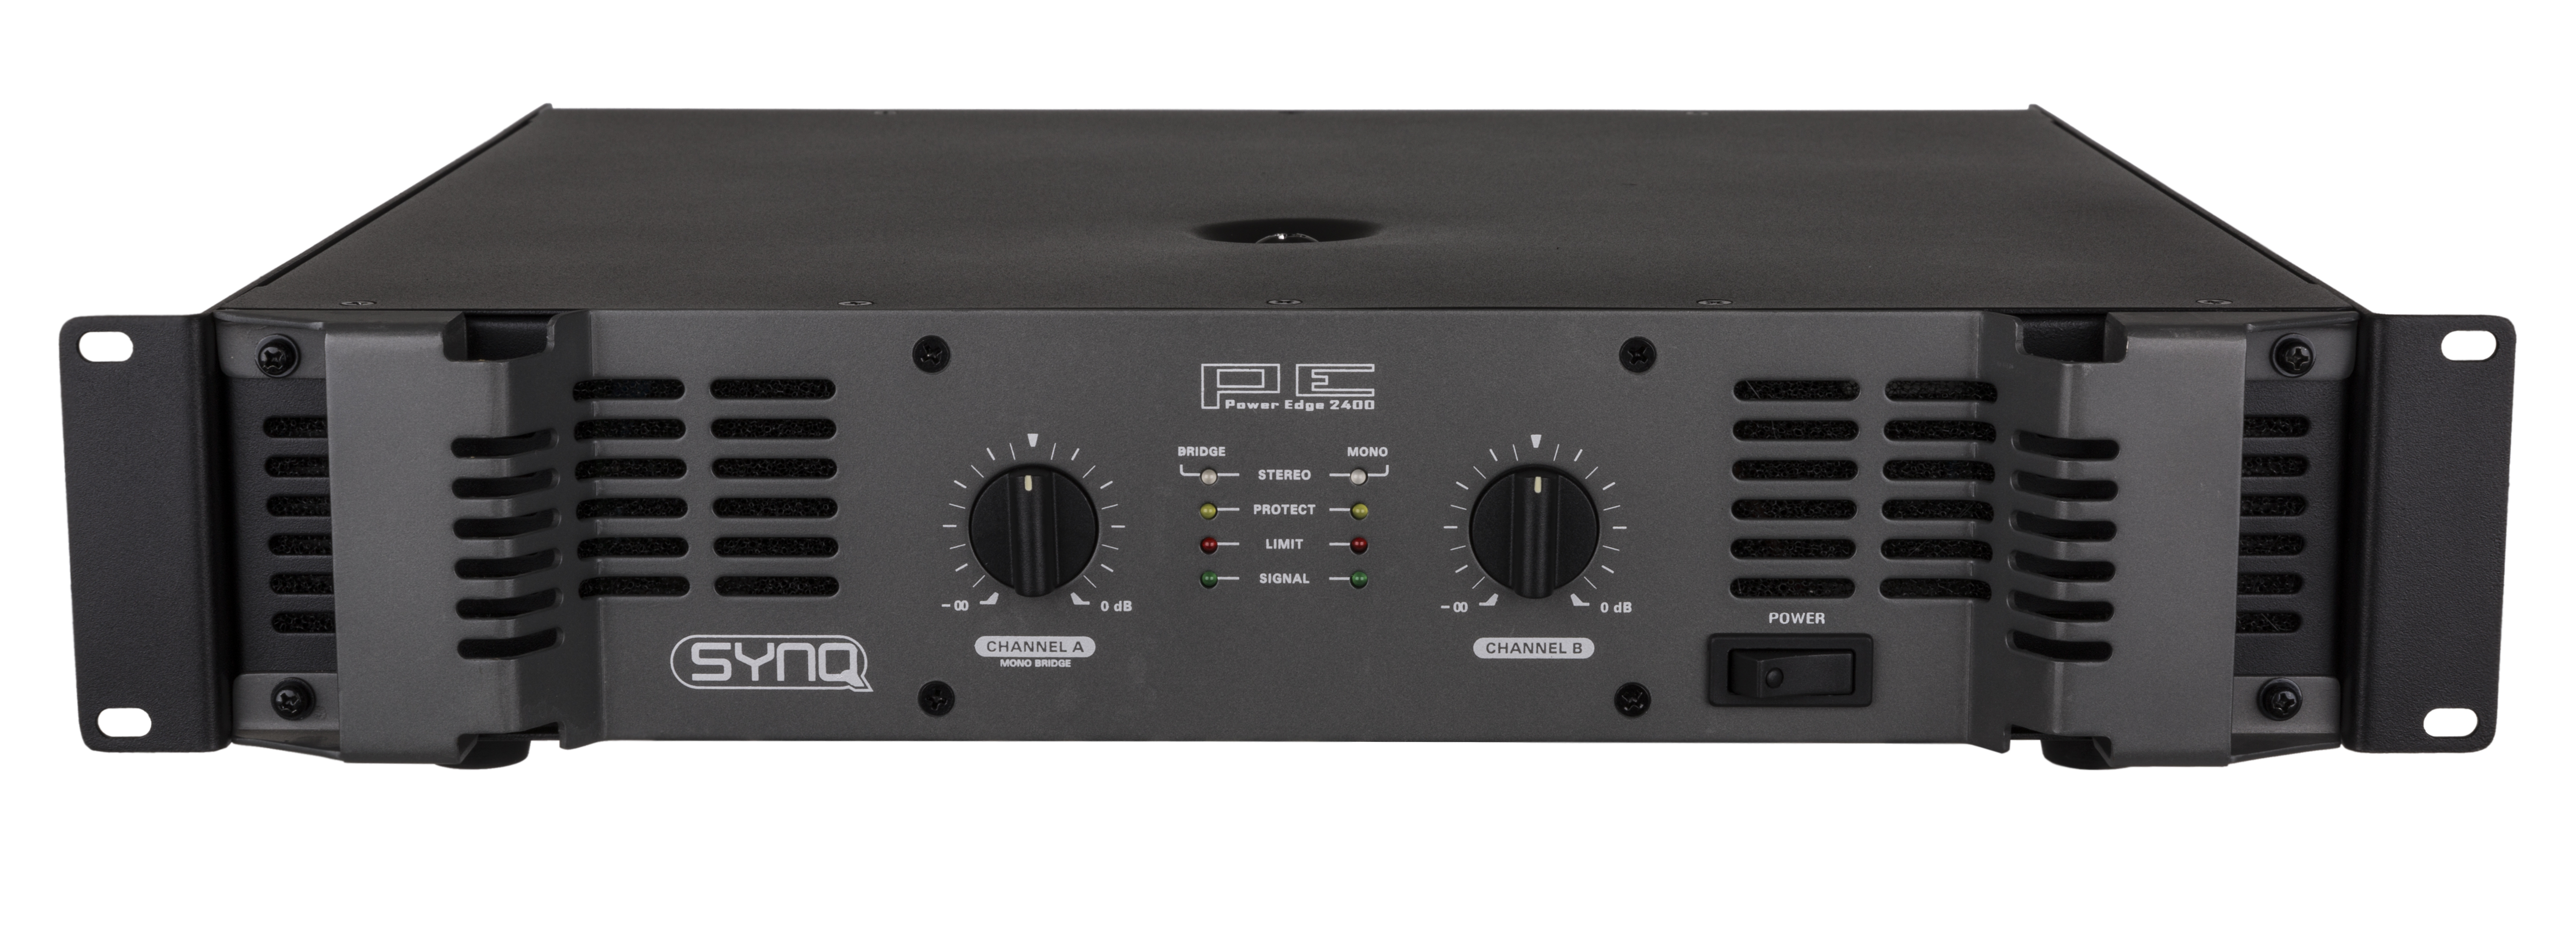 The Power Edge 'Class H' amplifiers are designed for pure power 2x 1200Wrms / 4ohm